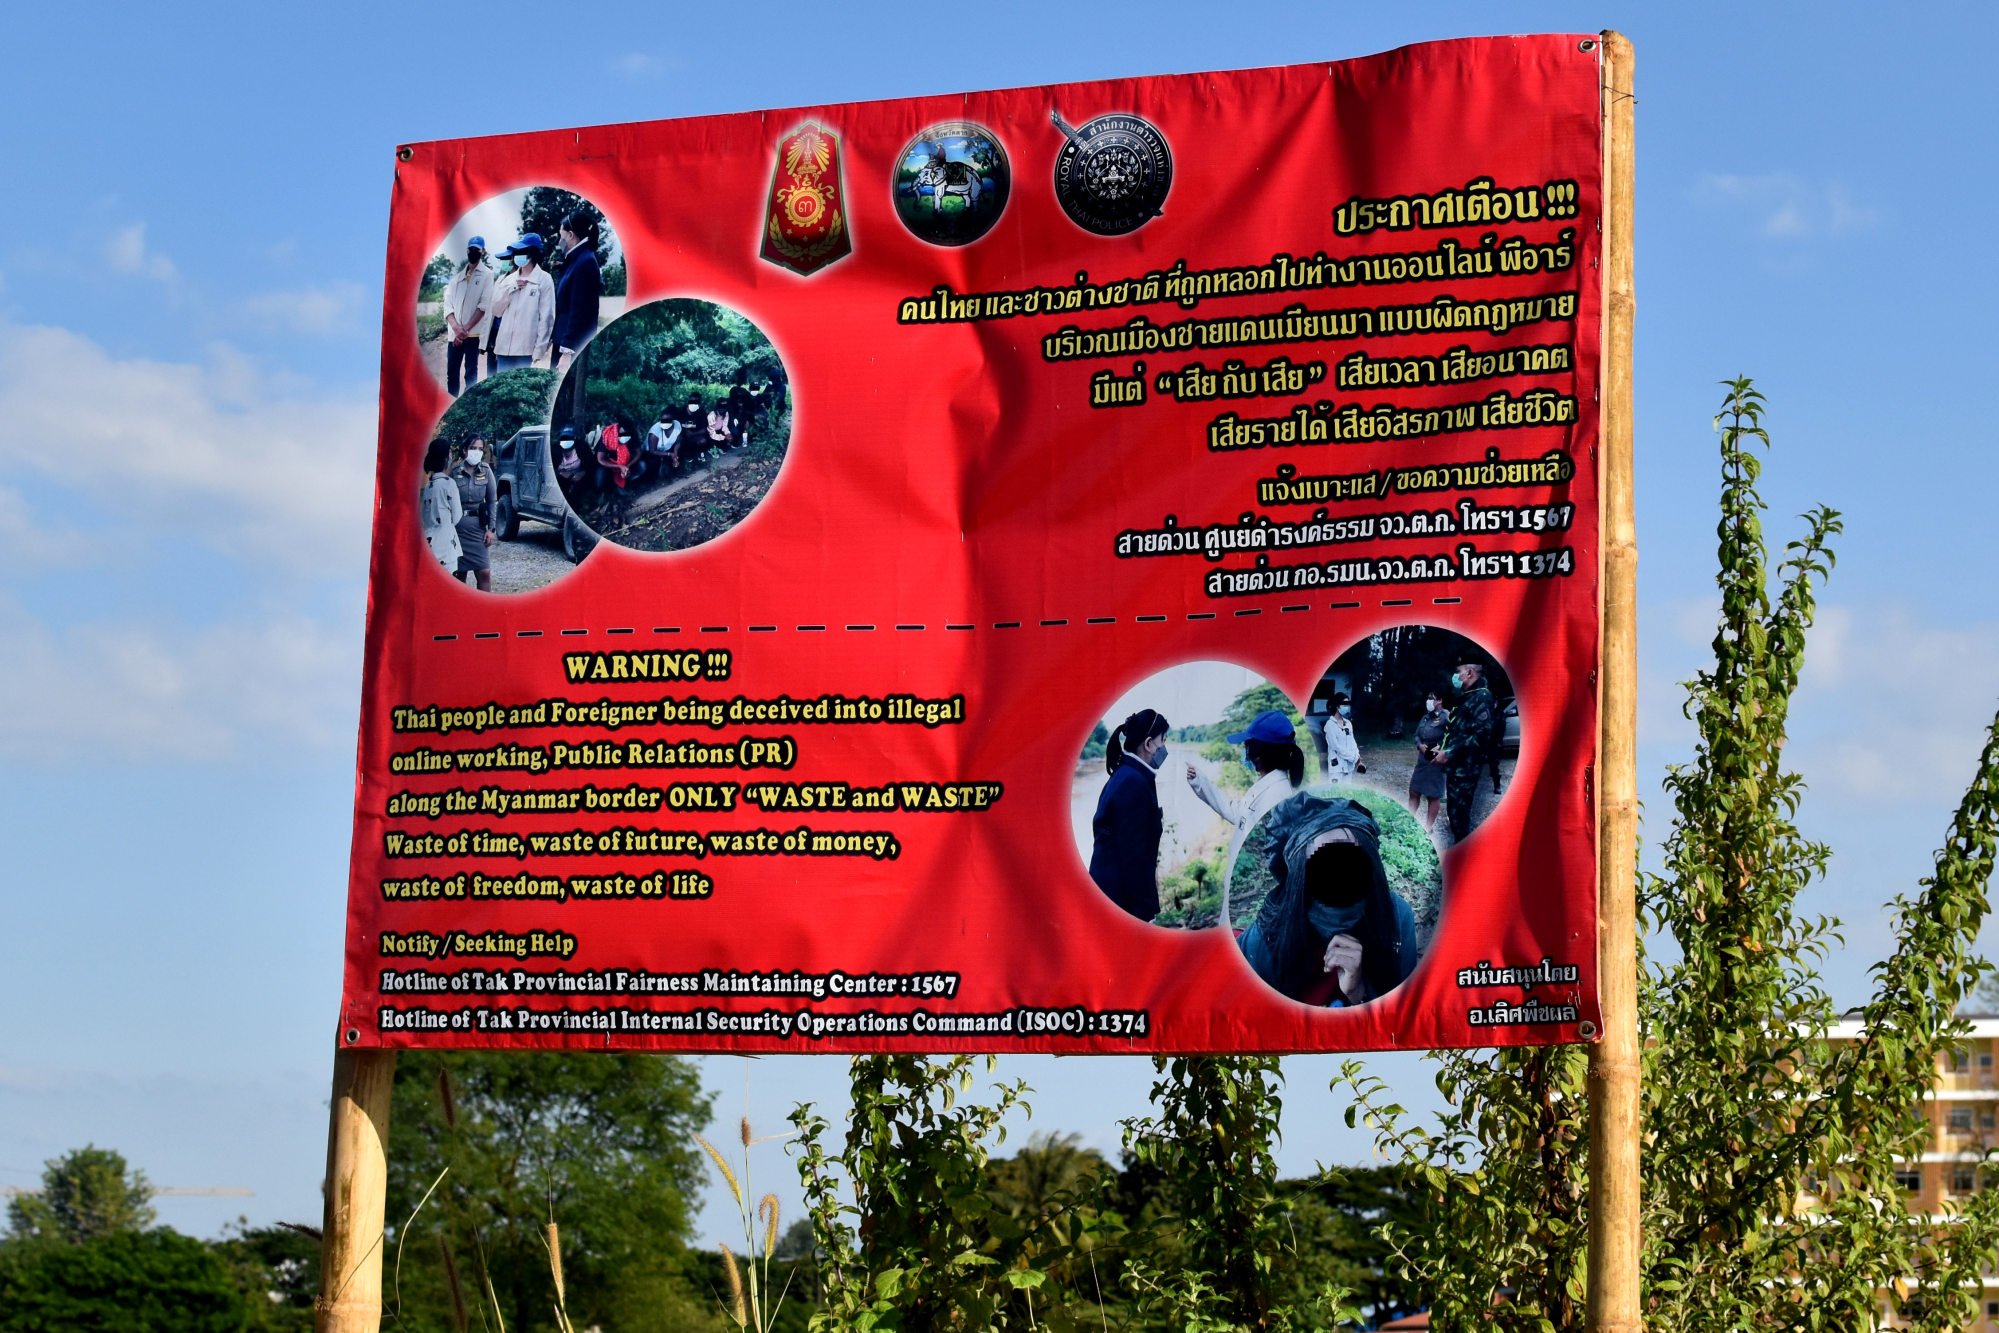 An anti-trafficking sign near the Thailand-Myanmar border warns potential victims not to be “deceived into illegal online working”. Photo: Allegra Mendelson